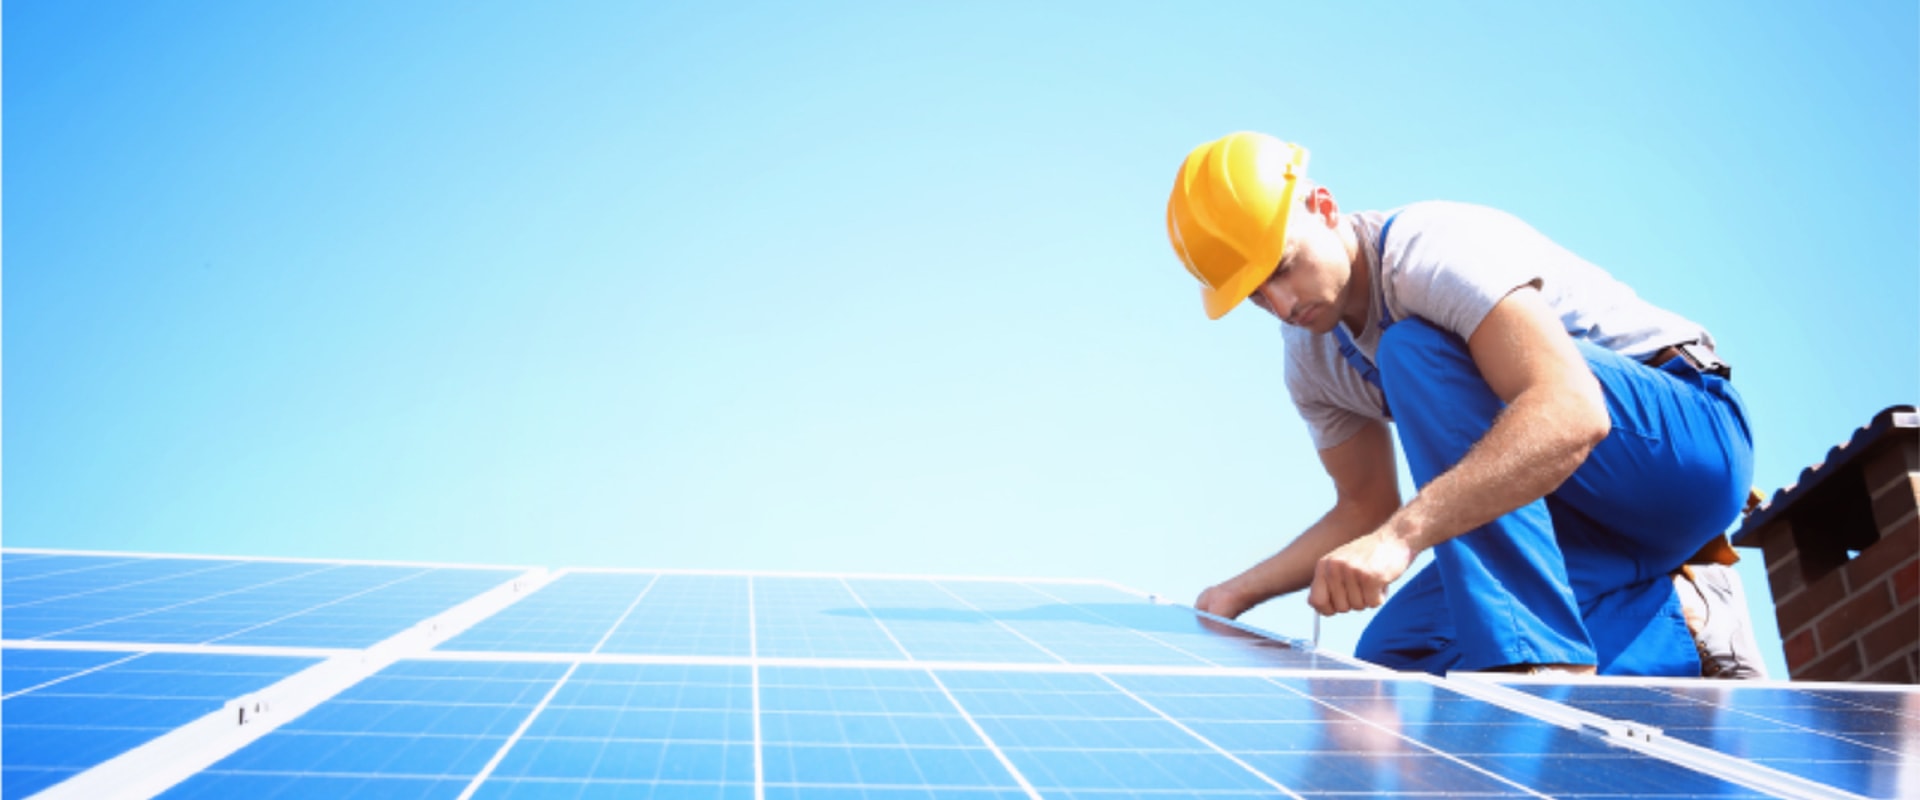 How Can The Solar Energy Industry Grow Their Businesses With Digital Marketing In 2023